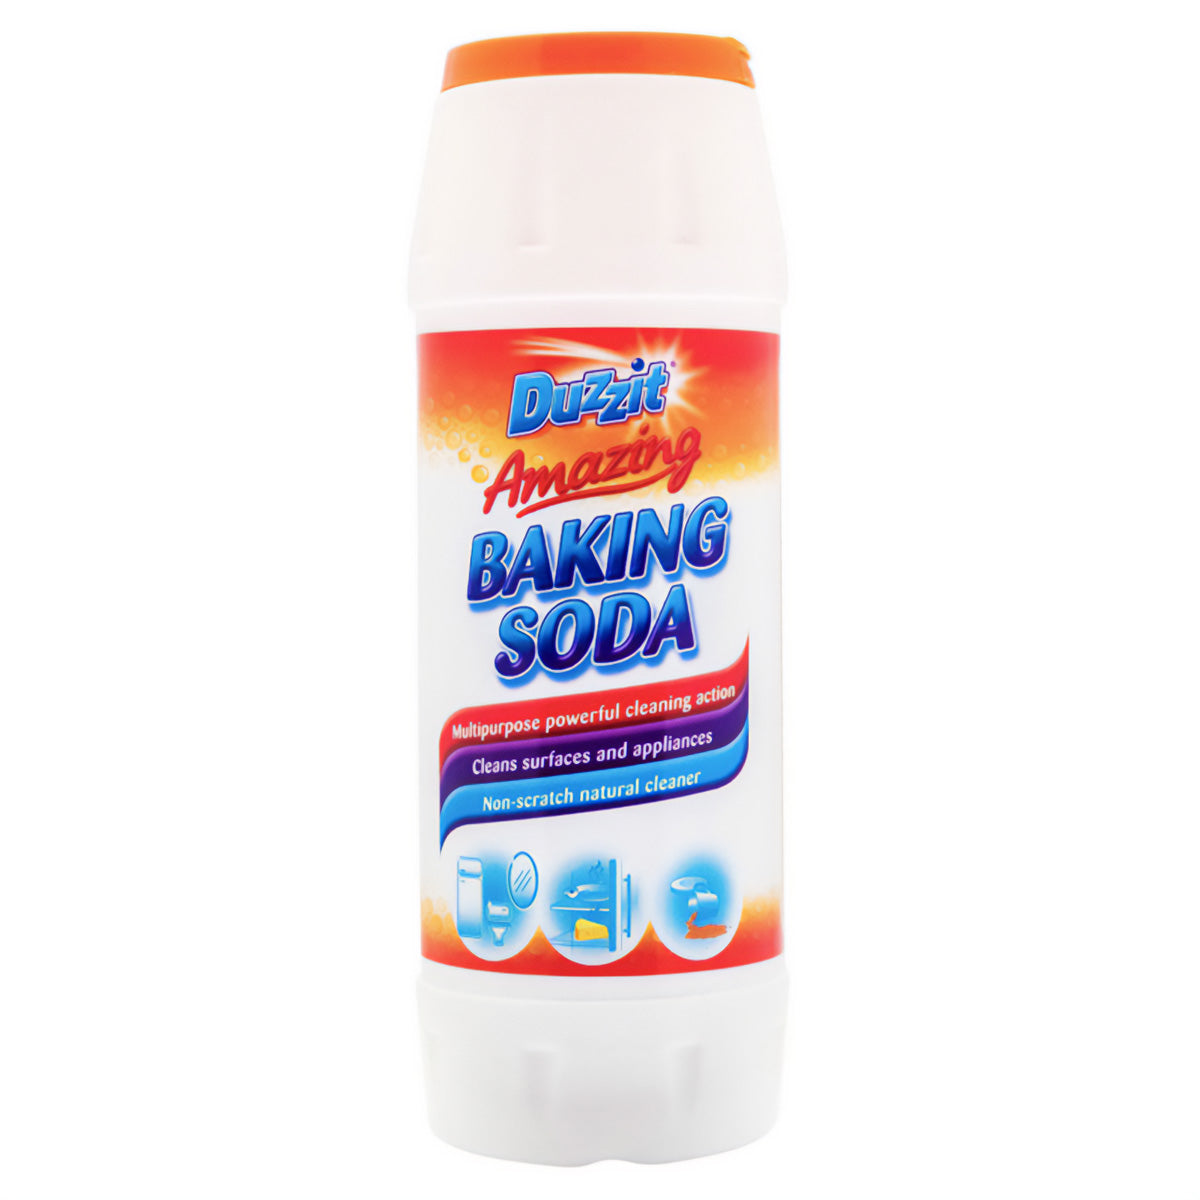 A bottle of Duzzit Baking Soda - 500g on a white background.